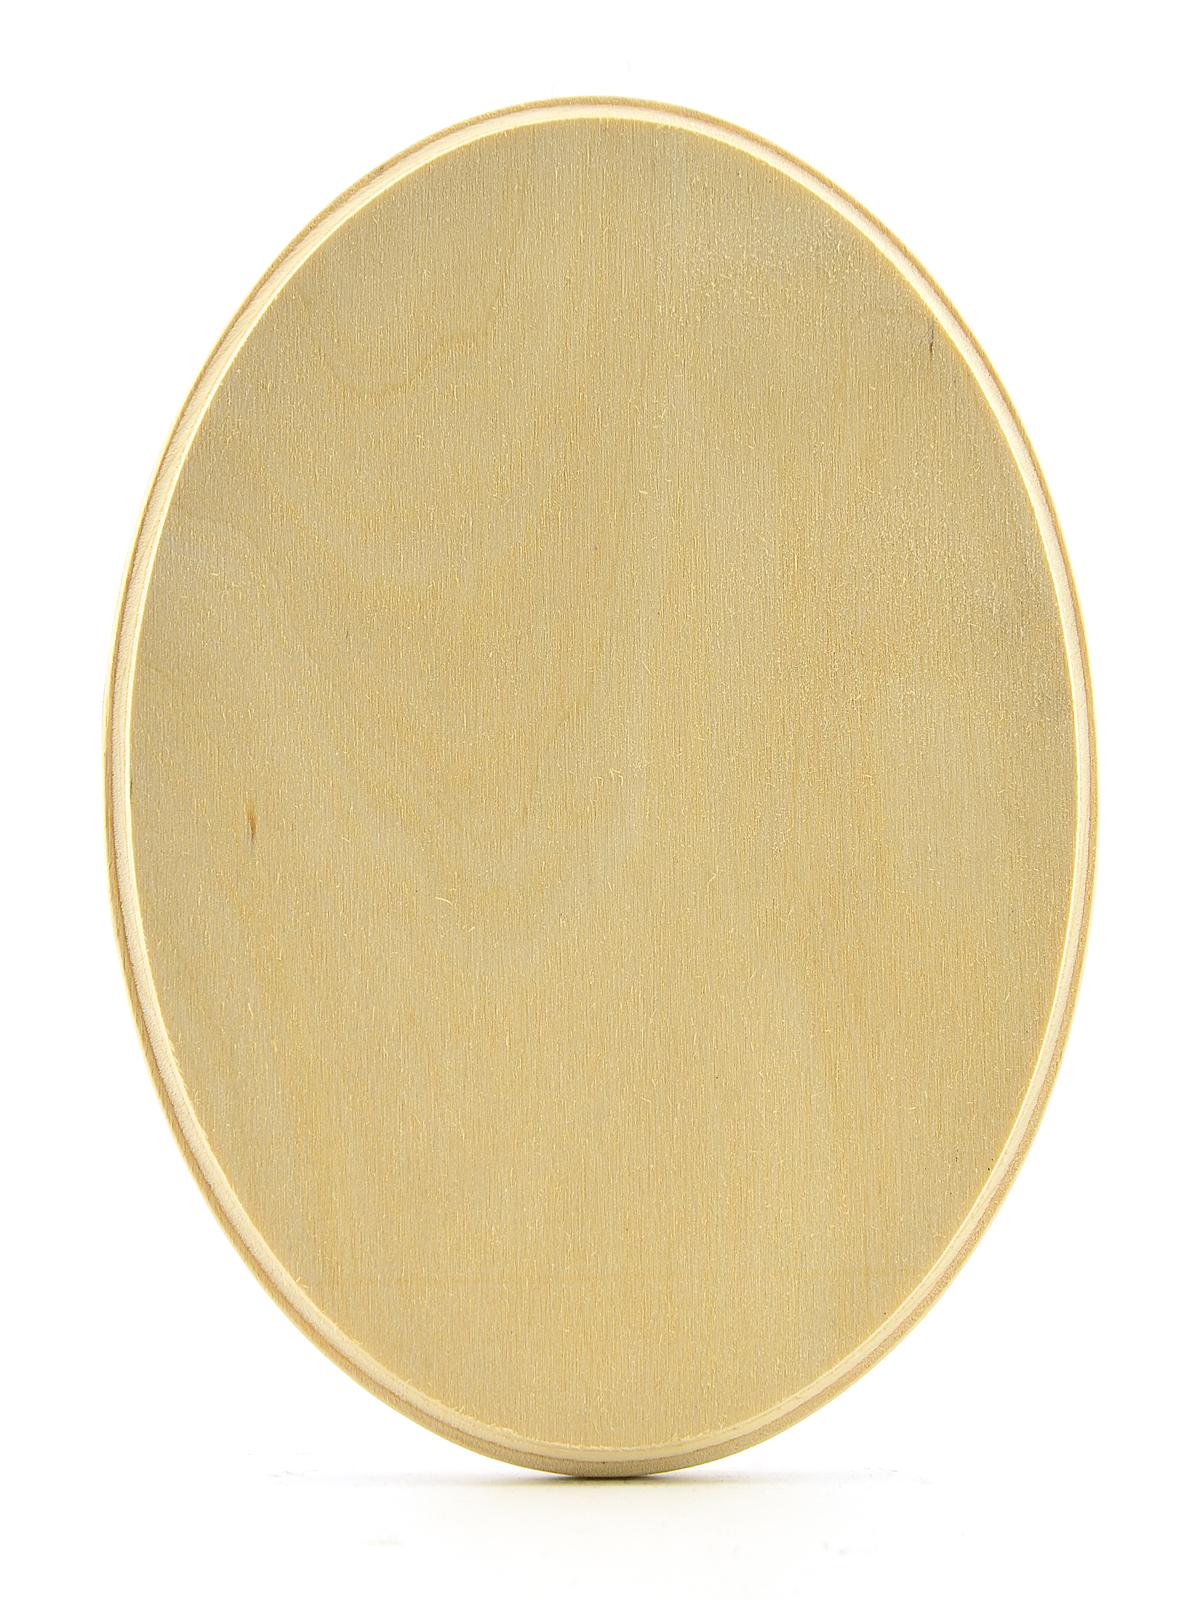 Baltic Birch Plywood Plaques Oval 0.38 In. X 5.25 In. X 7.25 In.